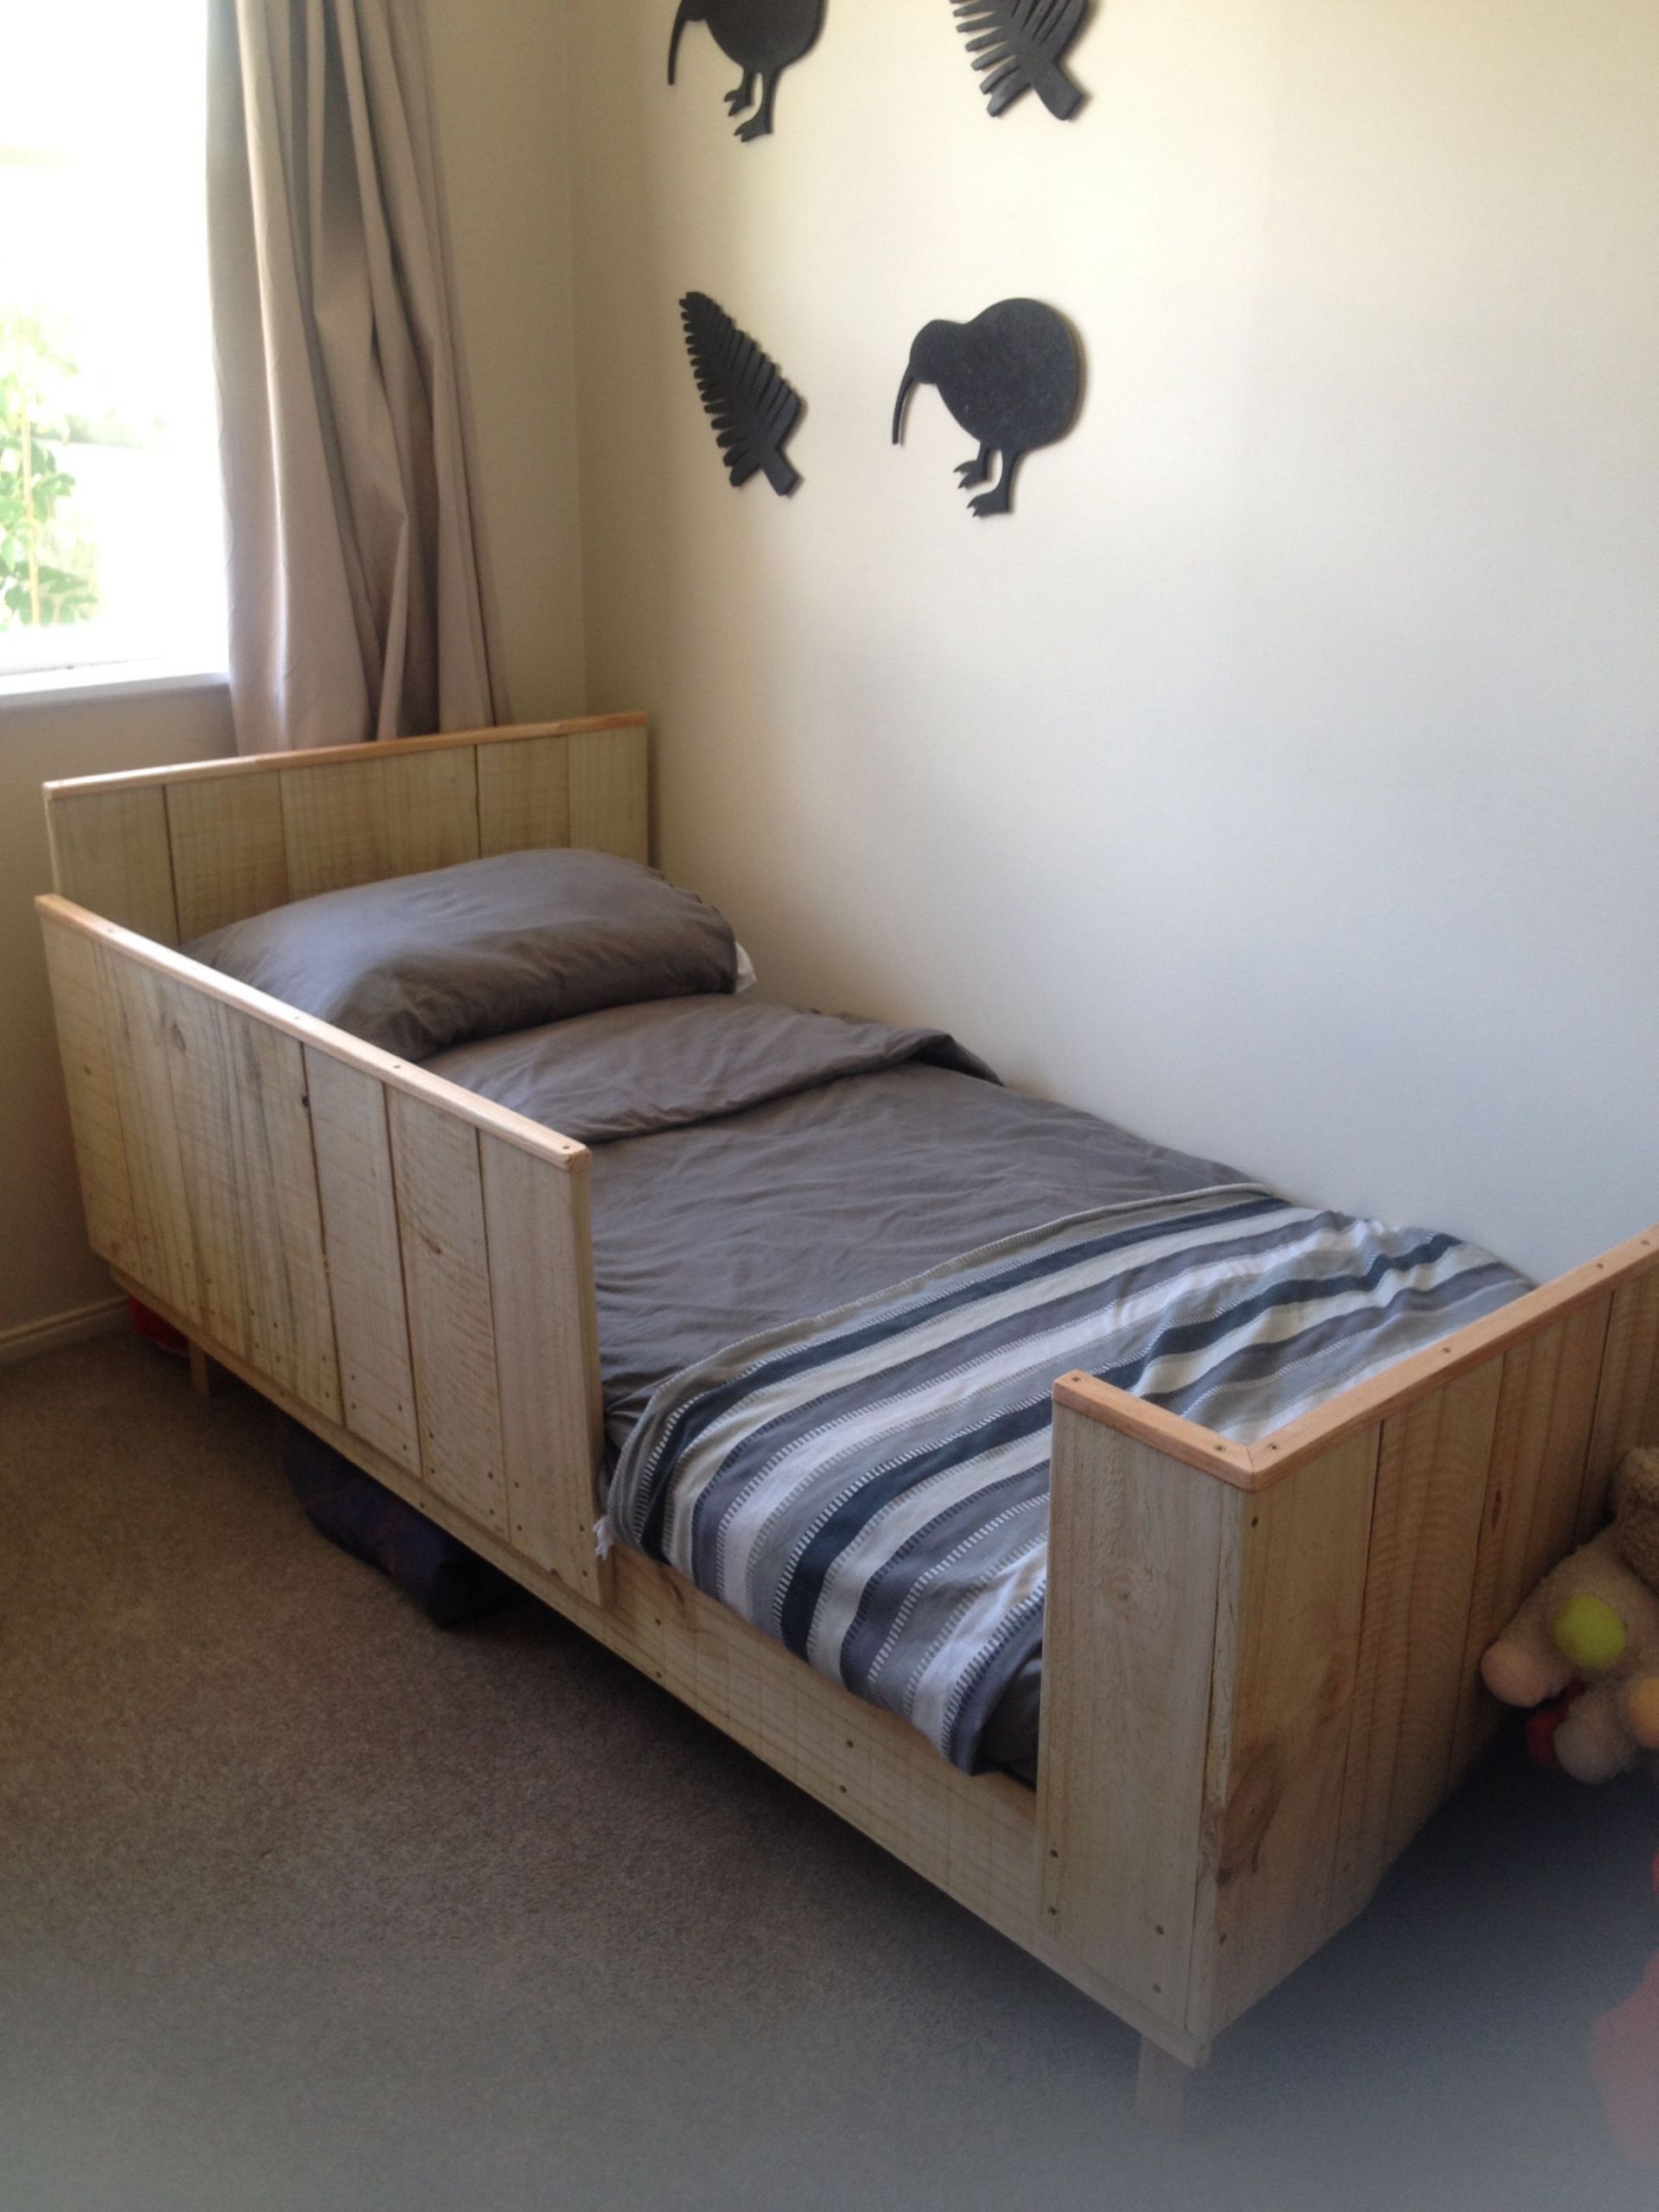 DIY Toddler Platform Bed
 Technically my husband built our toddlers bed out of